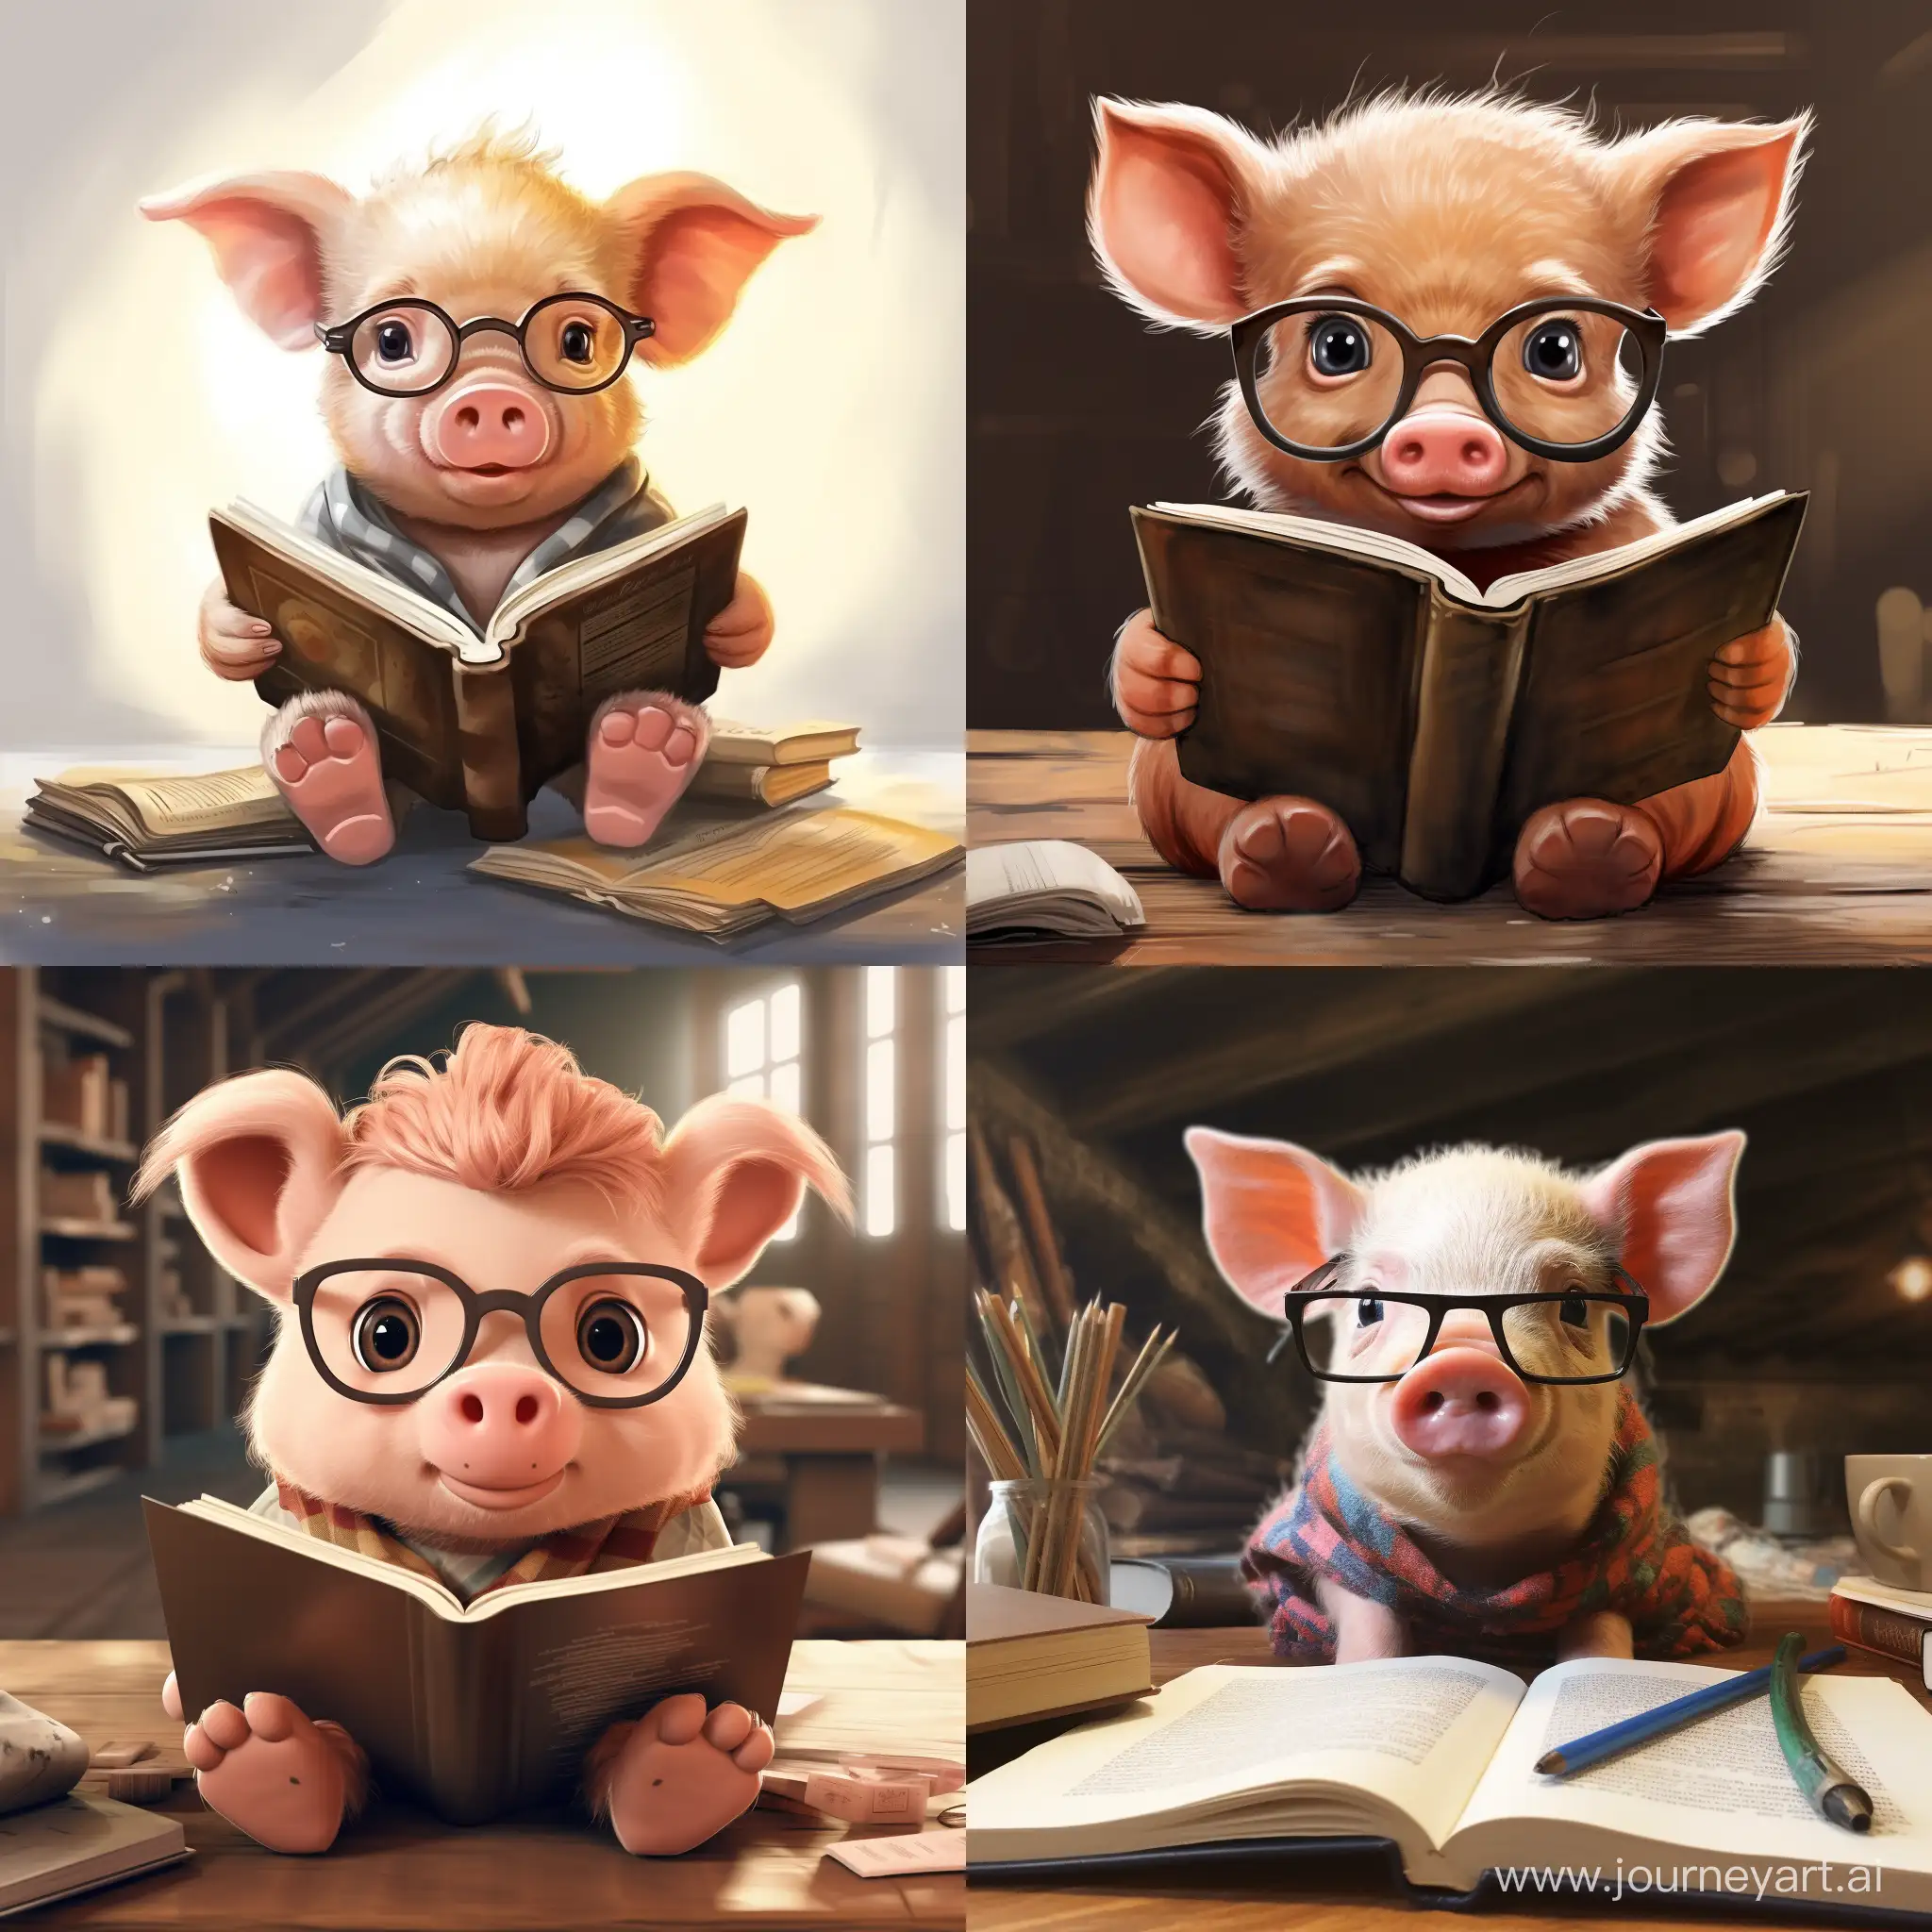 draw a little pig with glasses reading book